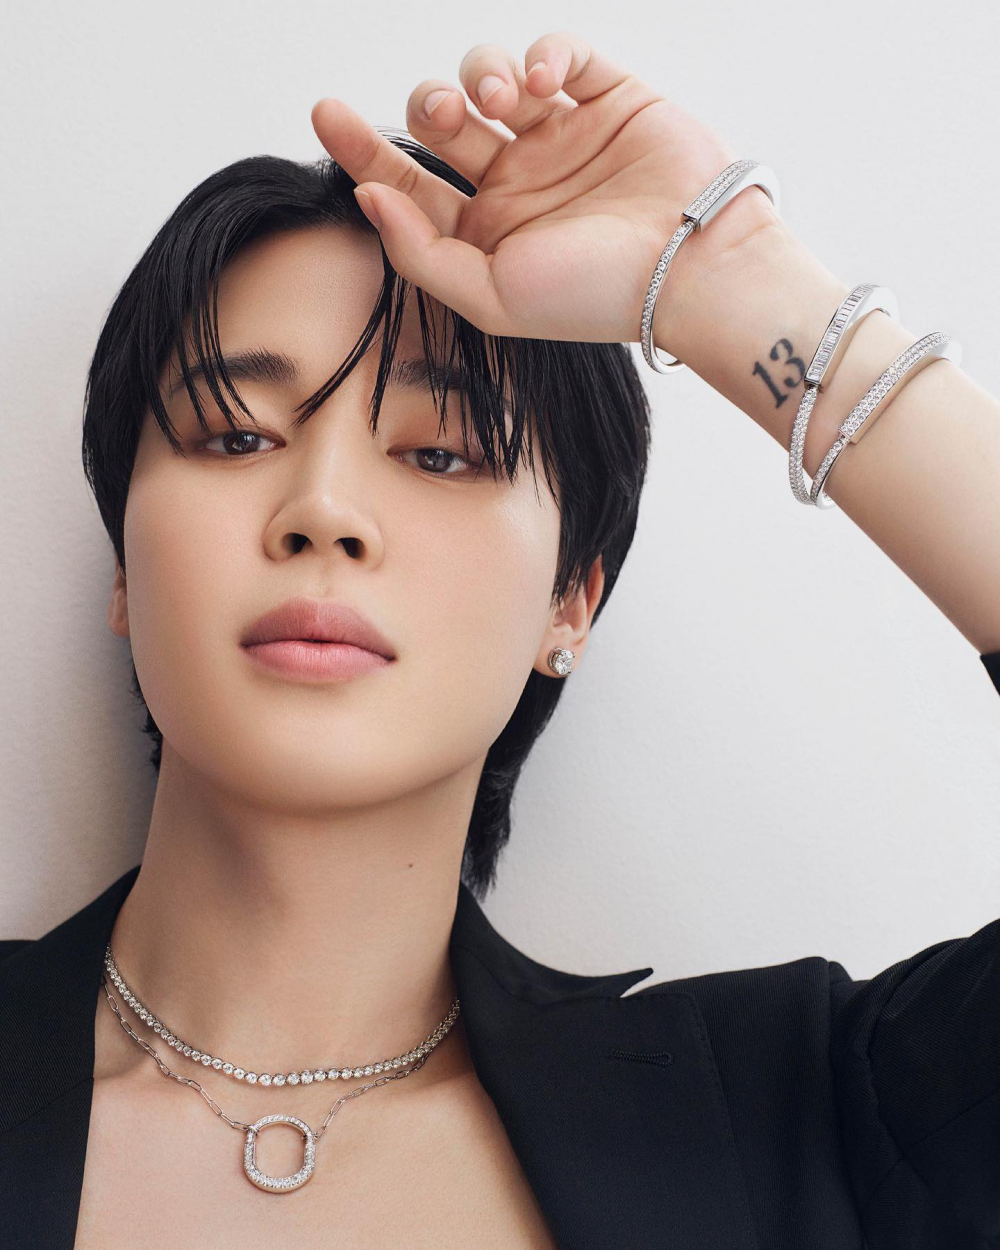 BTS Jimin in a black suit wearing the Tiffany Lock Collection.